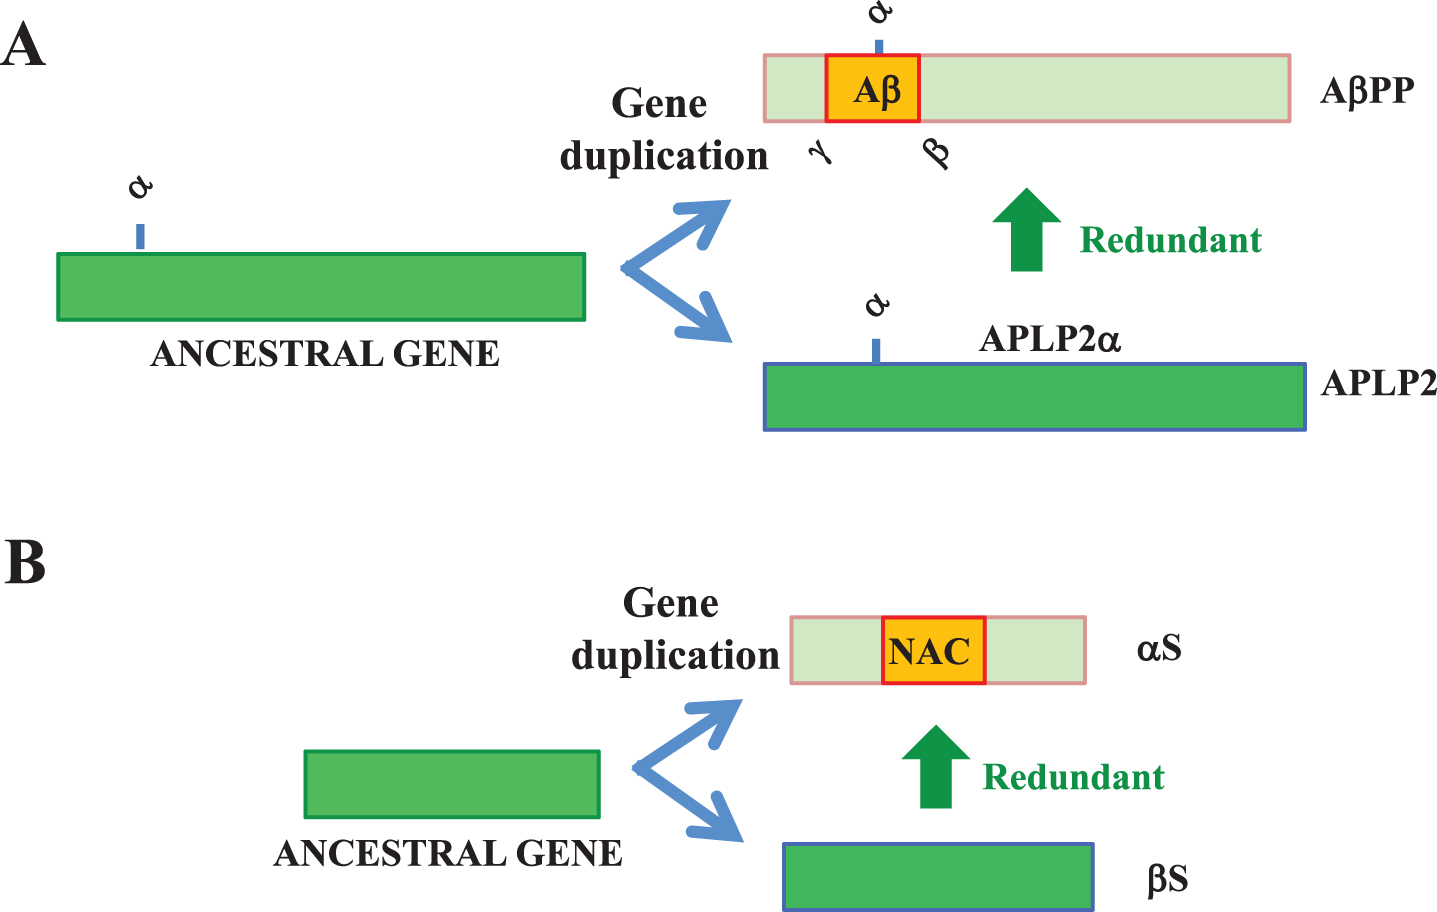 APs and their homologues. A) Aβ may have been created by gene duplication from an AβPP-ancestral gene into AβPP and APLP-2 genes. APLP2/APLP2α may be redundant for some physiological functions of AβPP/AβPPα that were downregulated during creation of the Aβ domain. While α-secretase sites are common among AβPP family members, β- and γ-secretase sites are specific to AβPP. B) Similarly, βS, a non-amyloidogenic homologue of αS, may be redundant for some physiological functions of αS that were downregulated during gene duplication.